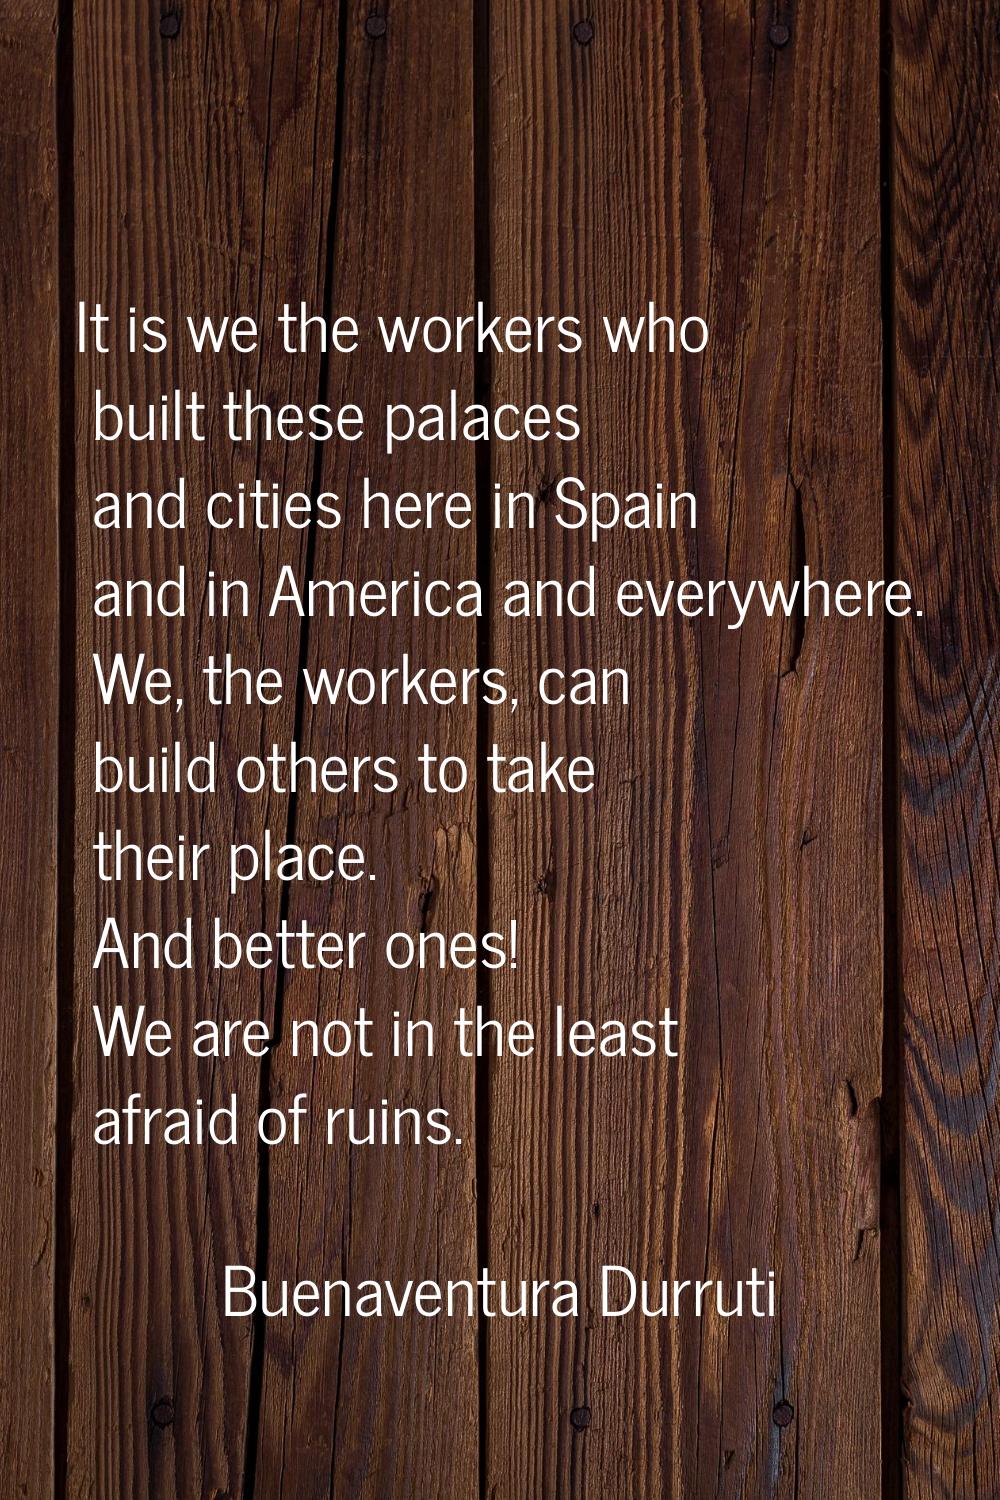 It is we the workers who built these palaces and cities here in Spain and in America and everywhere